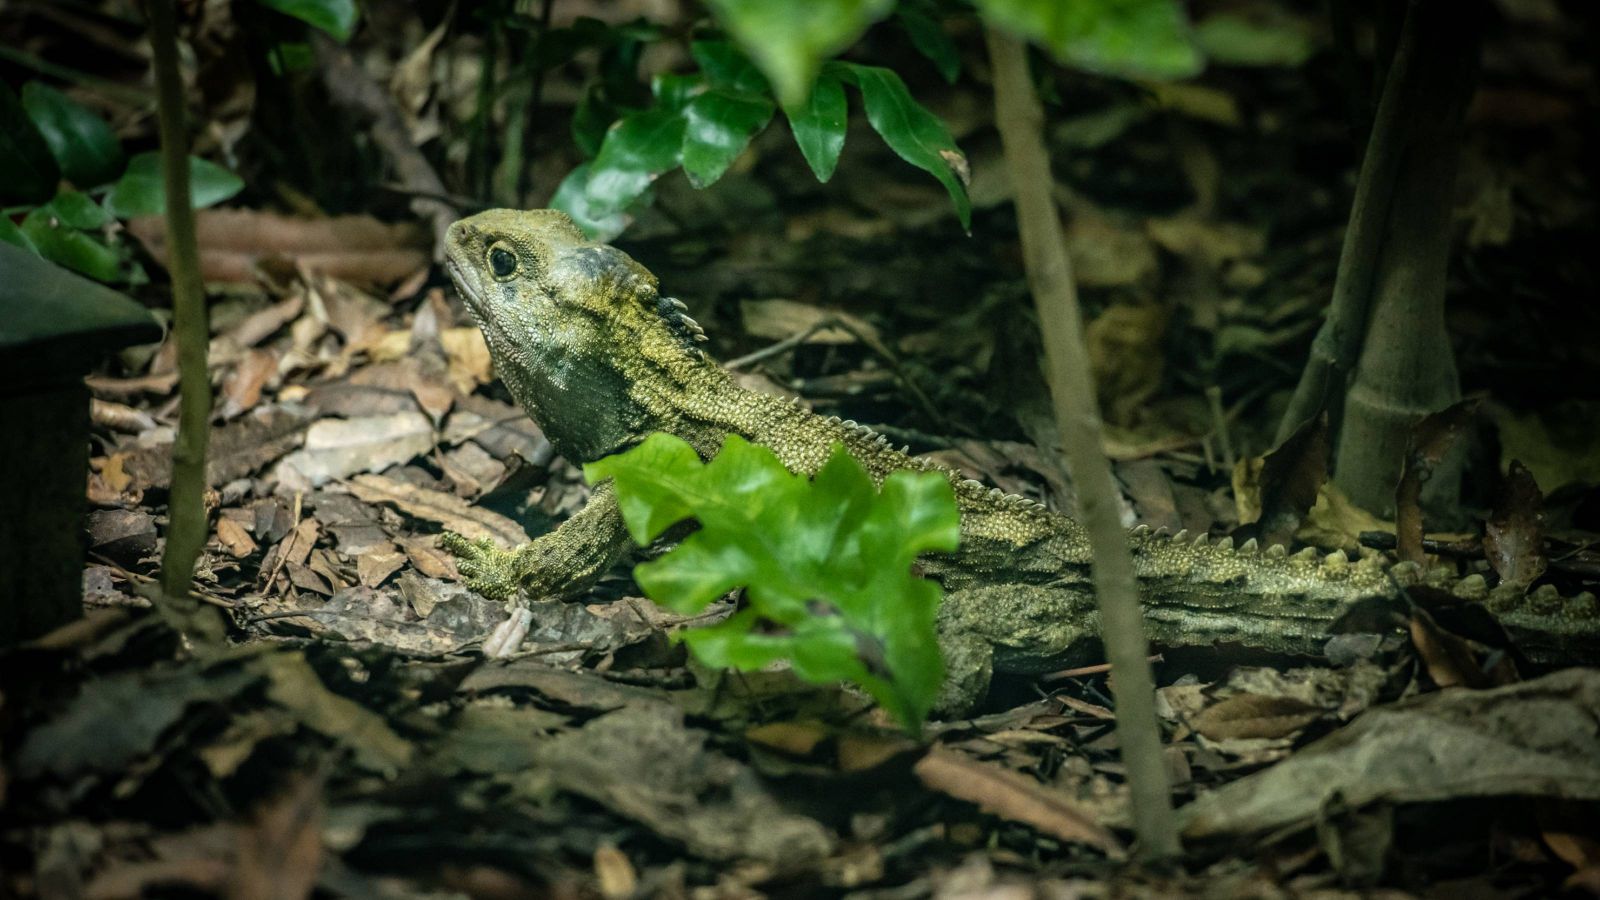 Tuatara sitting on bark chips with foliage in foreground